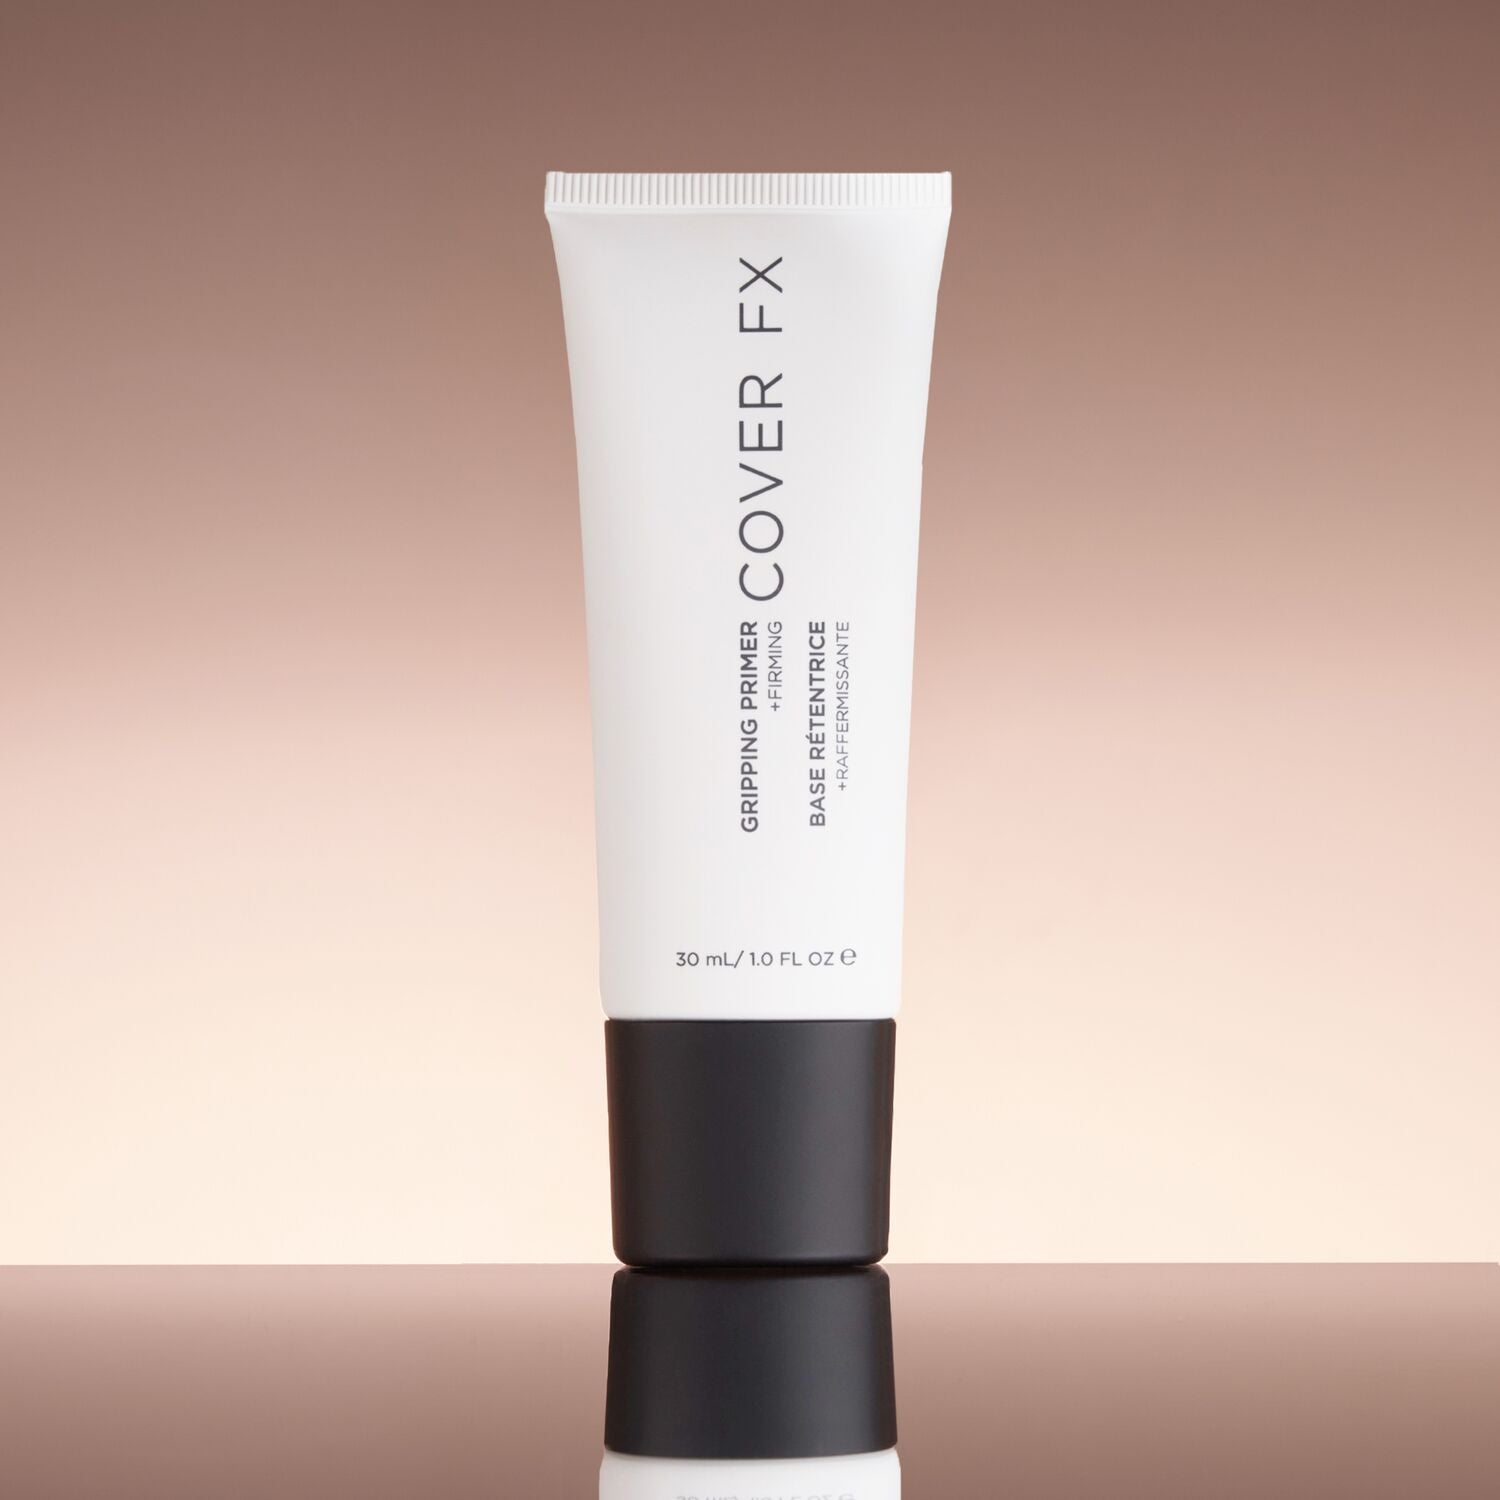 Cover FX Water Cloud Primer